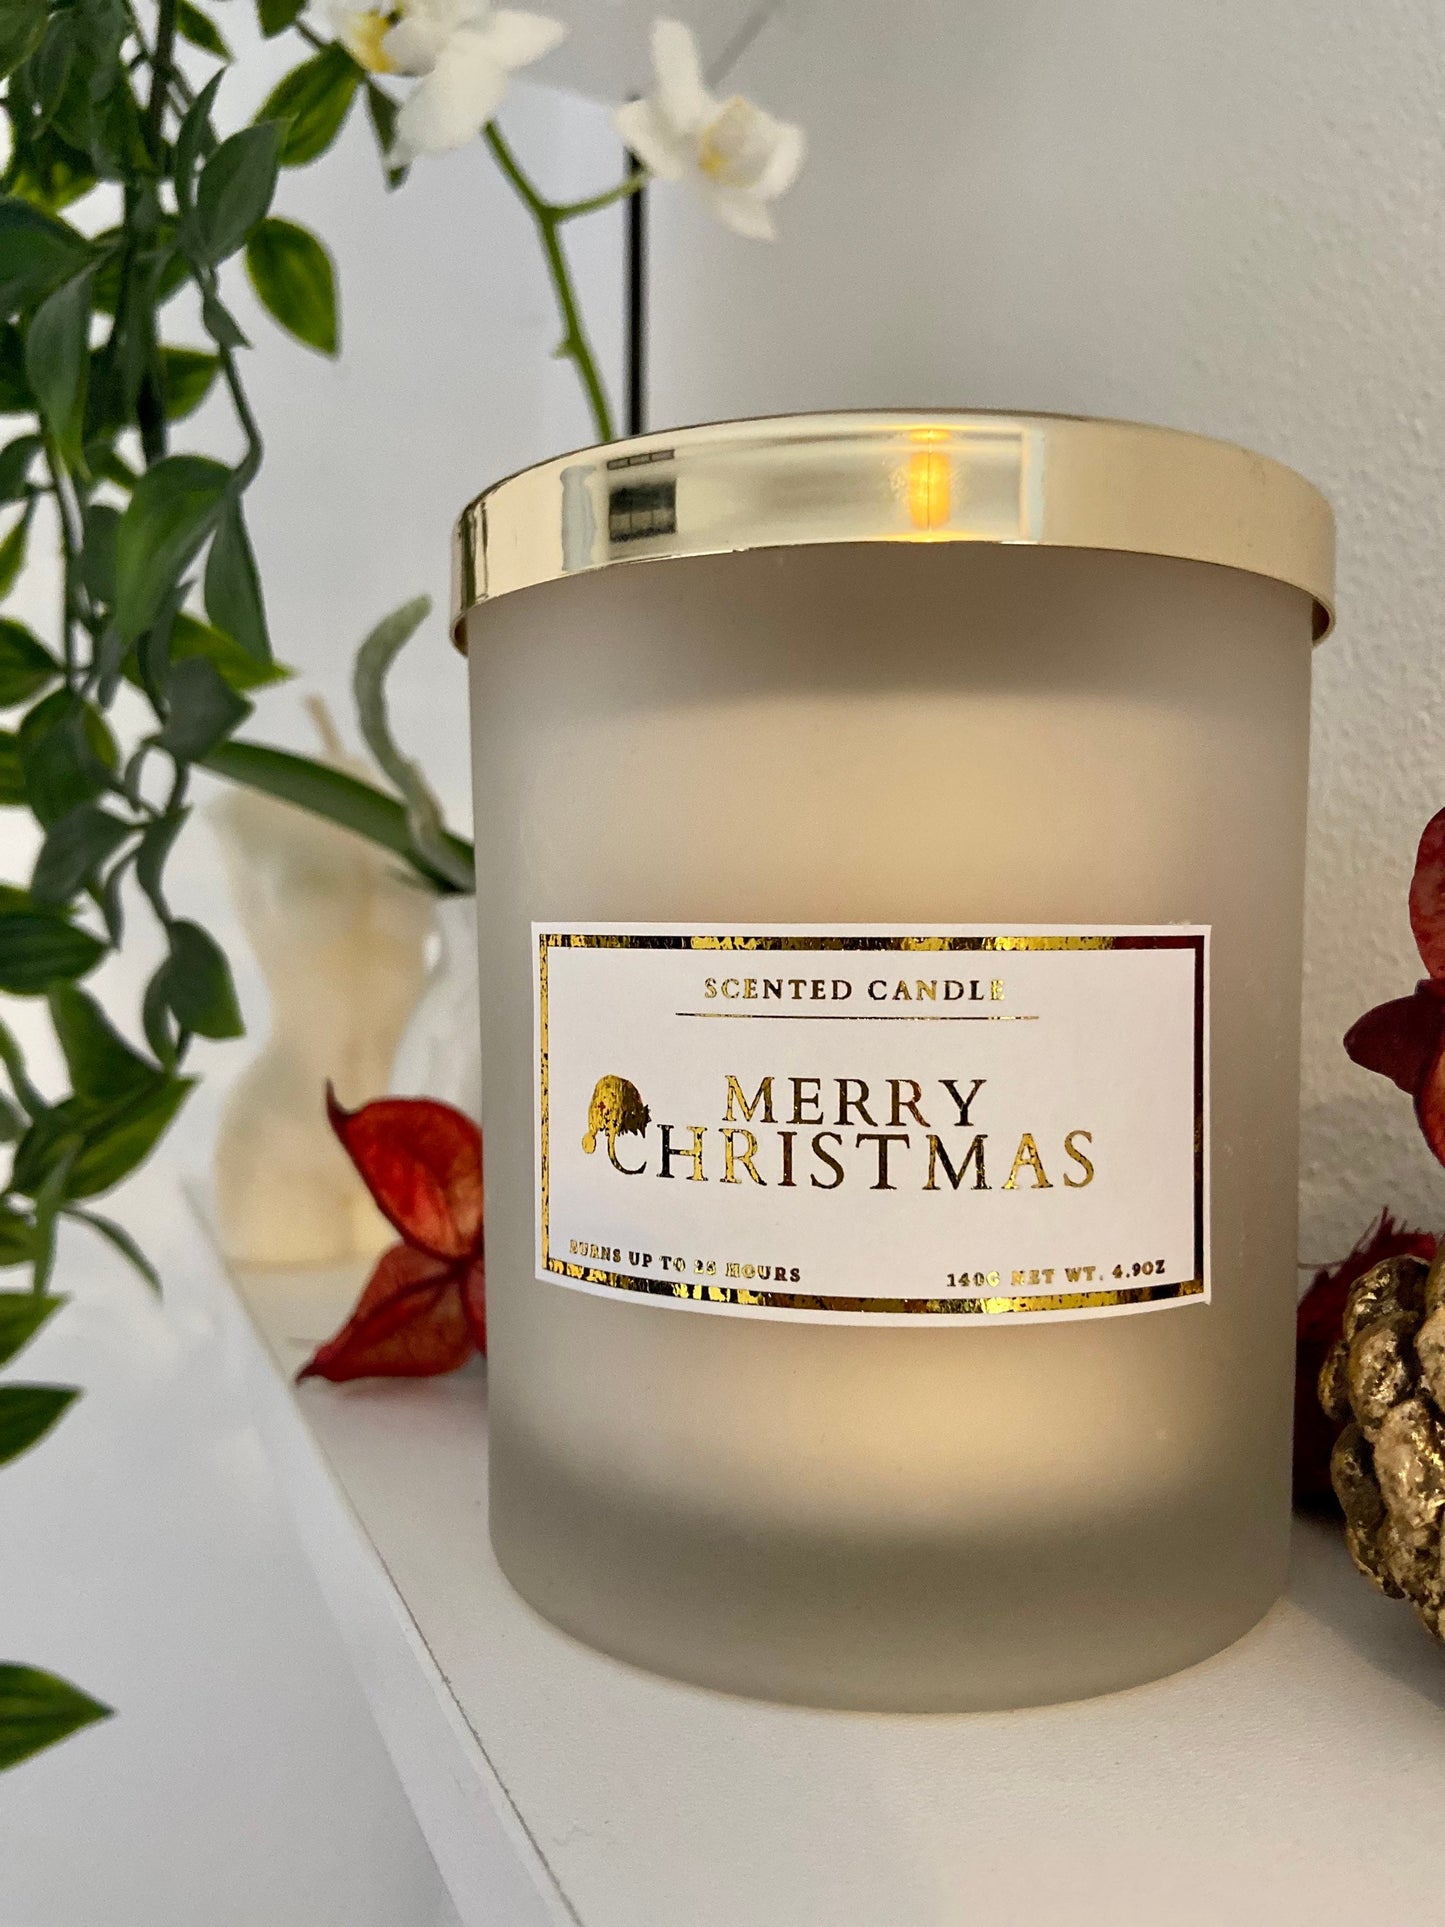 Personalised Merry Christmas Candle